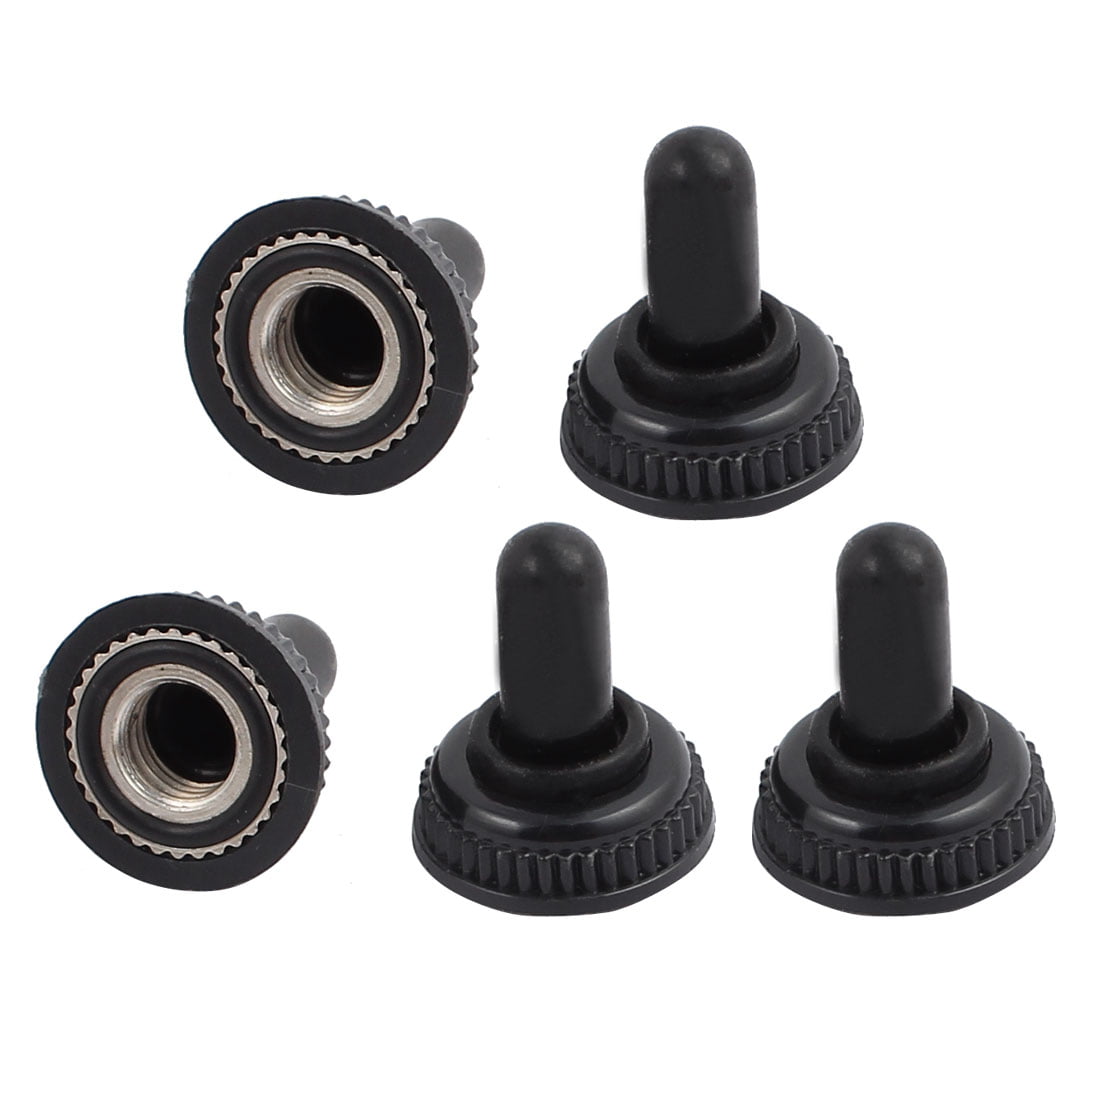 4x Car Toggle Switch Boot 12mm Rubber Waterproof Cover Cap Ip67 T700-1 Red SS for sale online